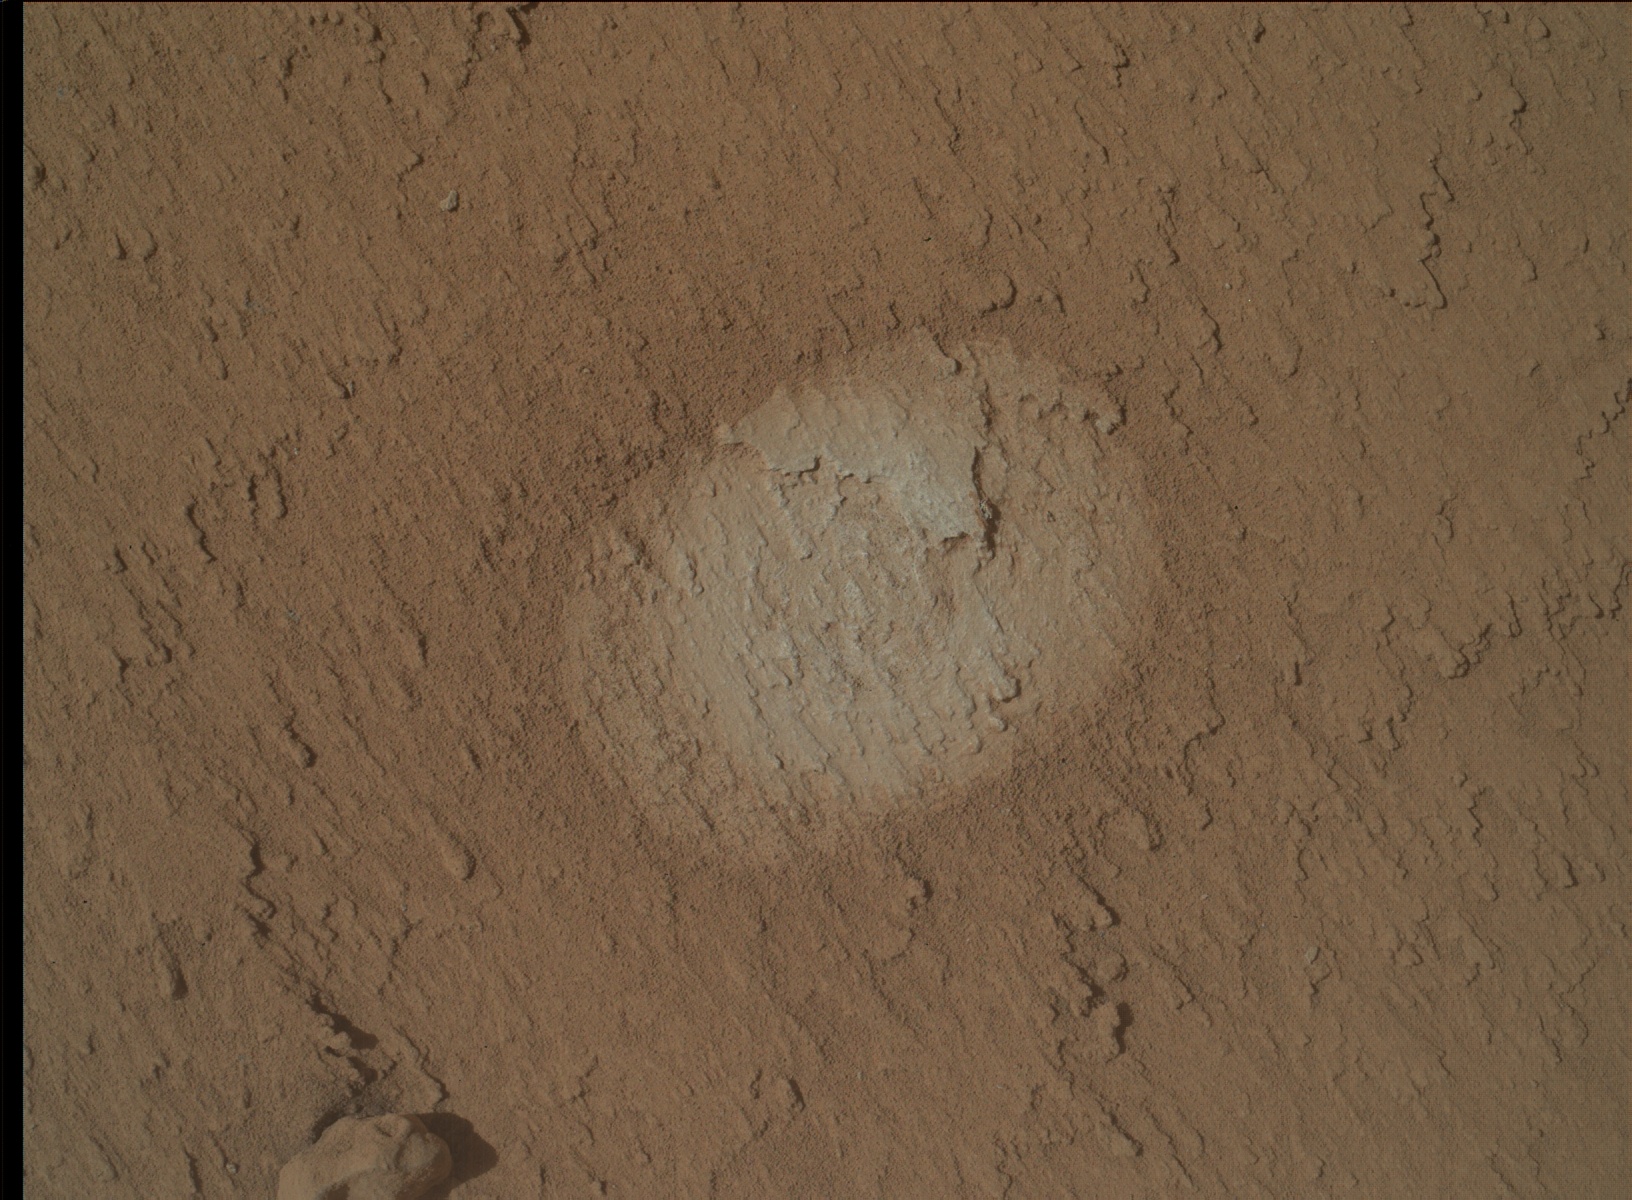 Nasa's Mars rover Curiosity acquired this image using its Mars Hand Lens Imager (MAHLI) on Sol 3778